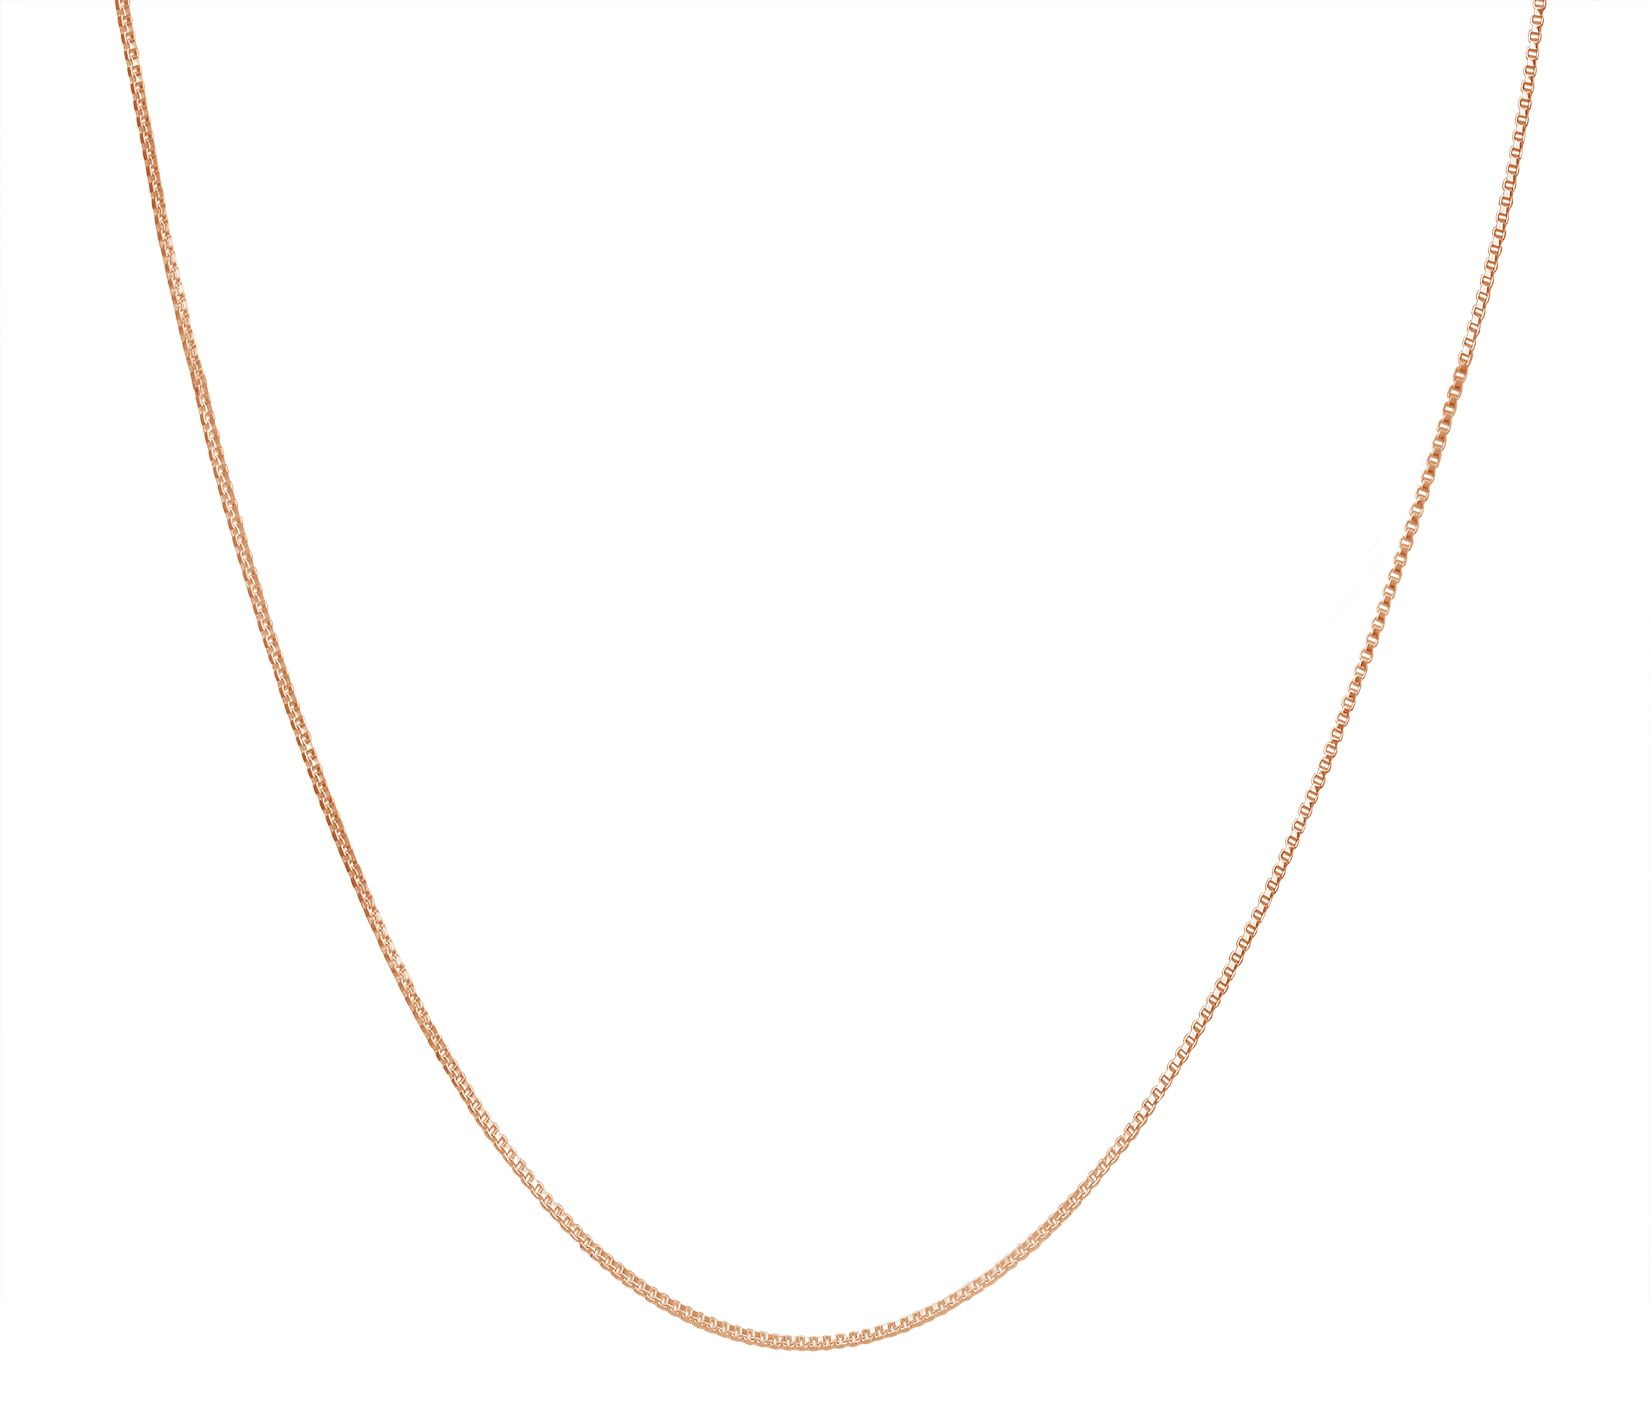 BUY 1 GET 1 FREE 18K Yellow Gold Filled Tarnish/Nickel-Free Cable Chain Necklace